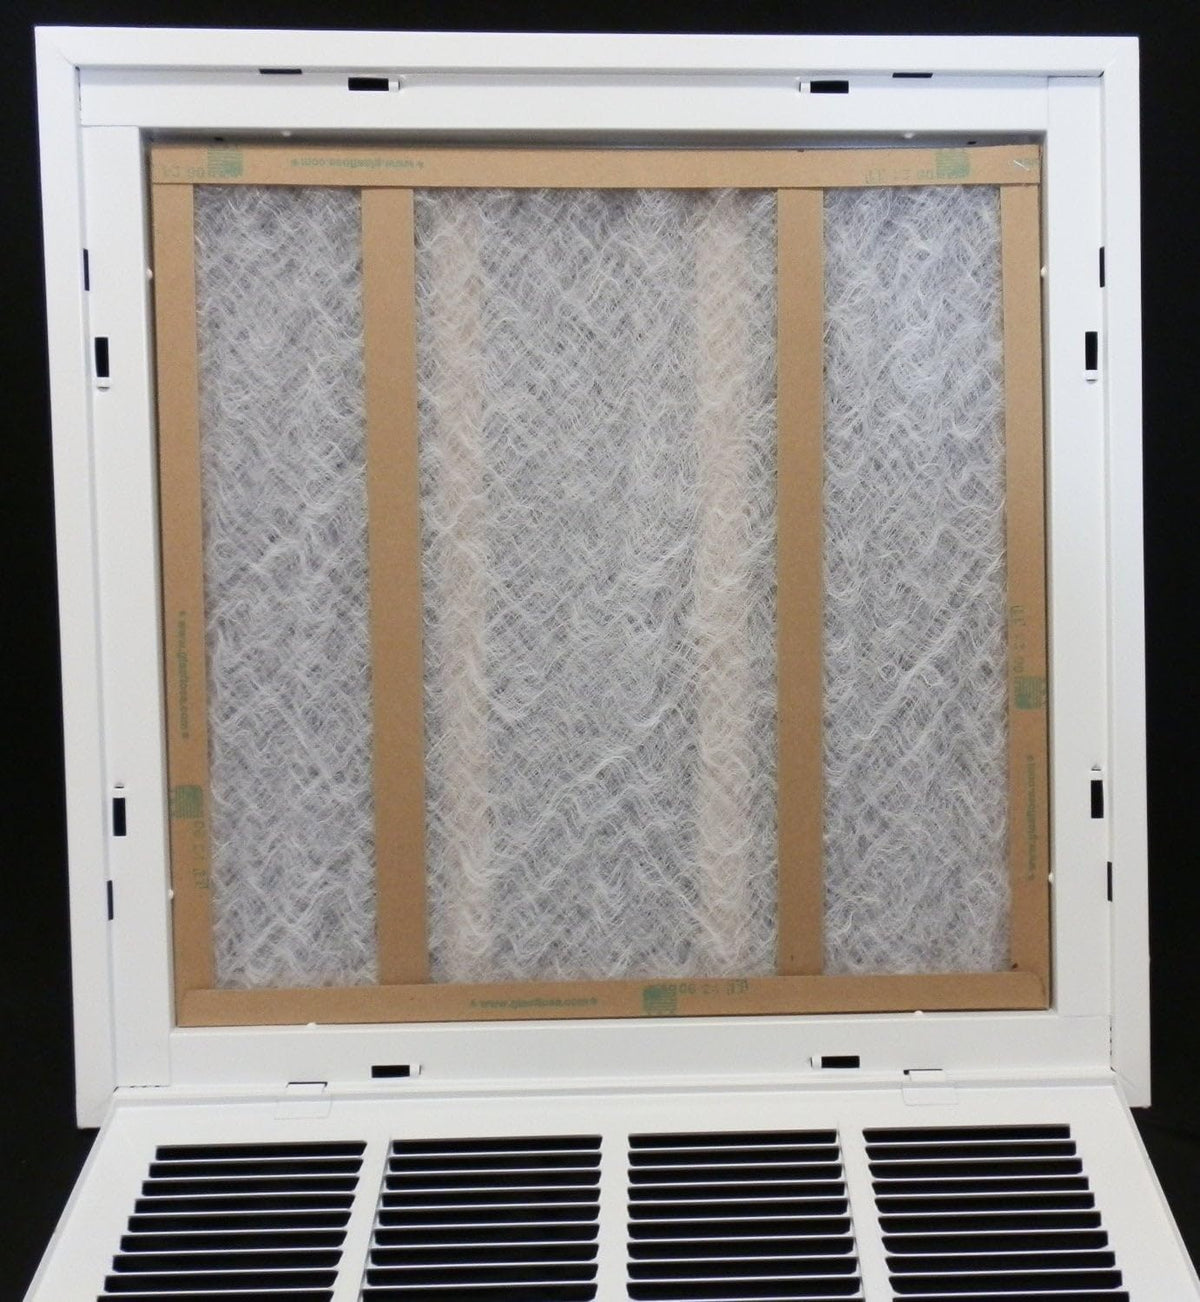 30&quot; X 30&quot; Steel Return Air Filter Grille for 1&quot; Filter - Removable Frame - [Outer Dimensions: 32 5/8&quot; X 32 5/8&quot;]